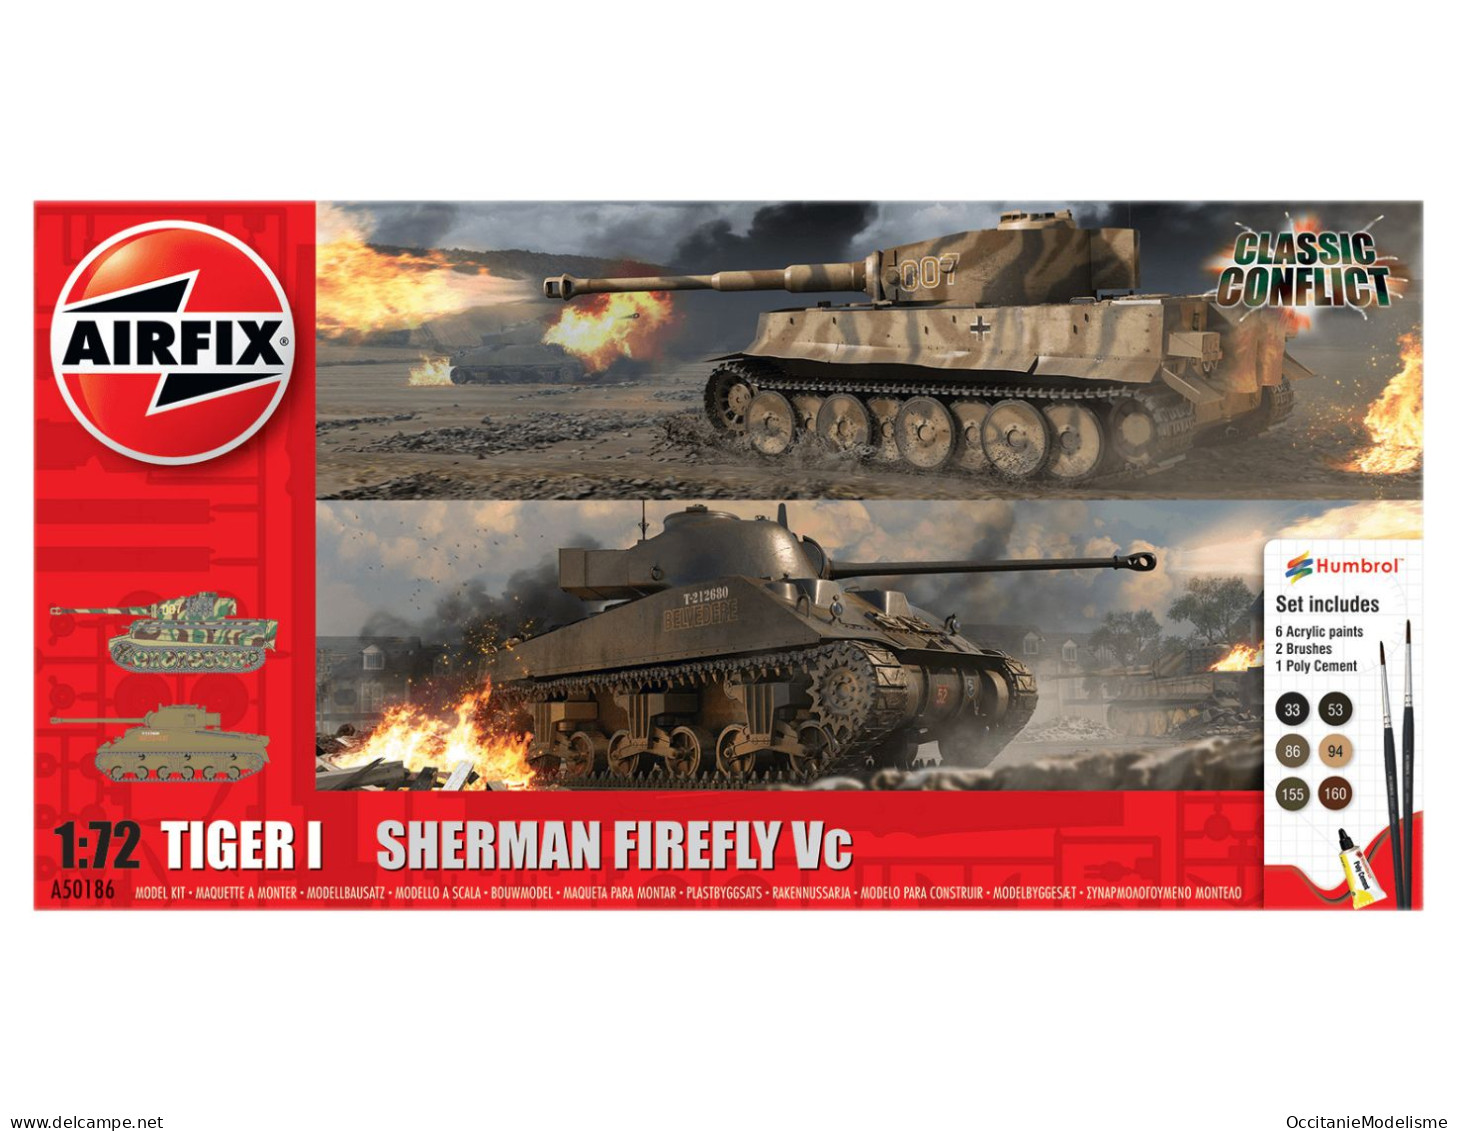 Airfix - Coffret TIGER I Vs SHERMAN FIREFLY Vc Maquettes + Peintures + Colle Réf. A50186 Neuf NBO 1/72 - Militär